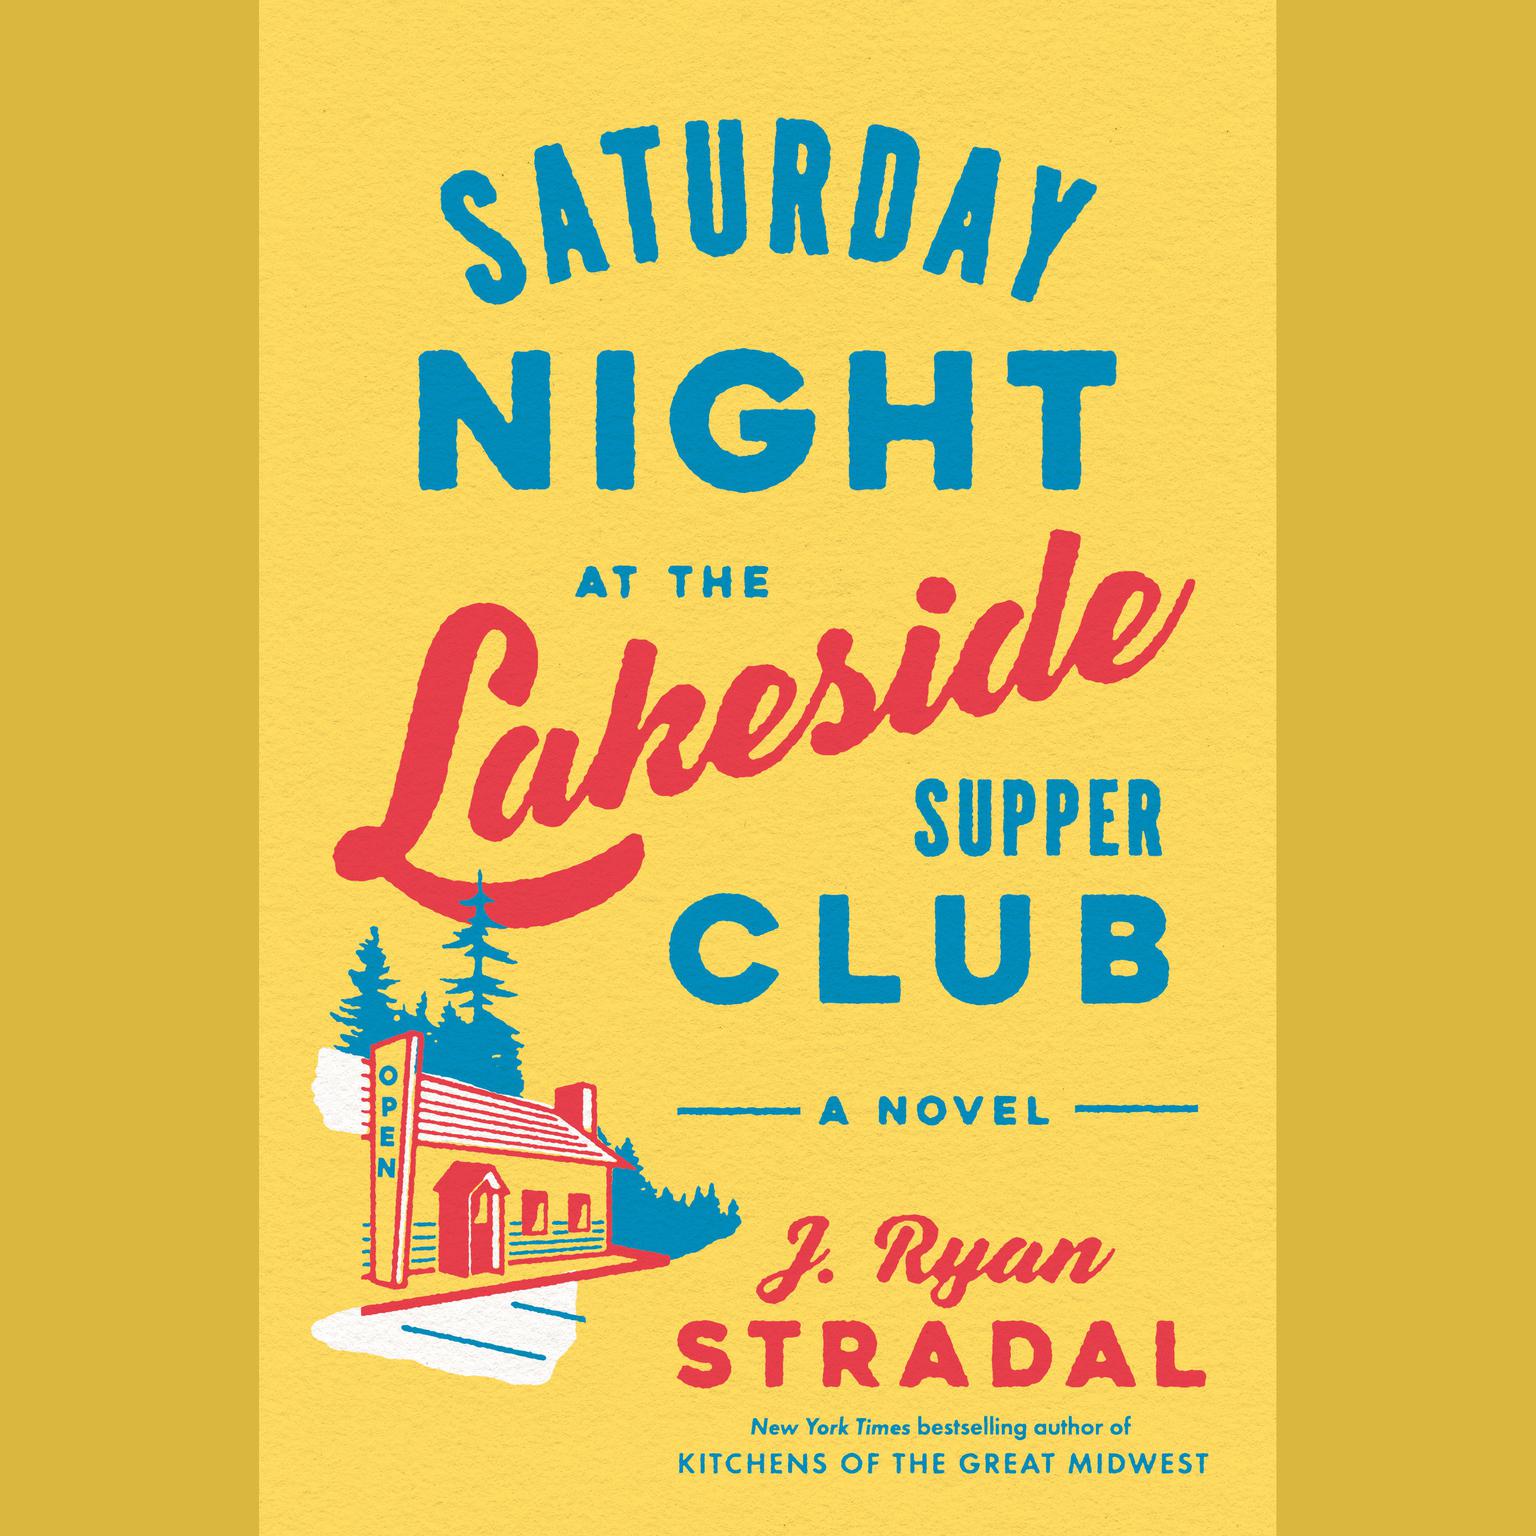 Saturday Night at the Lakeside Supper Club: A Novel Audiobook, by J. Ryan Stradal